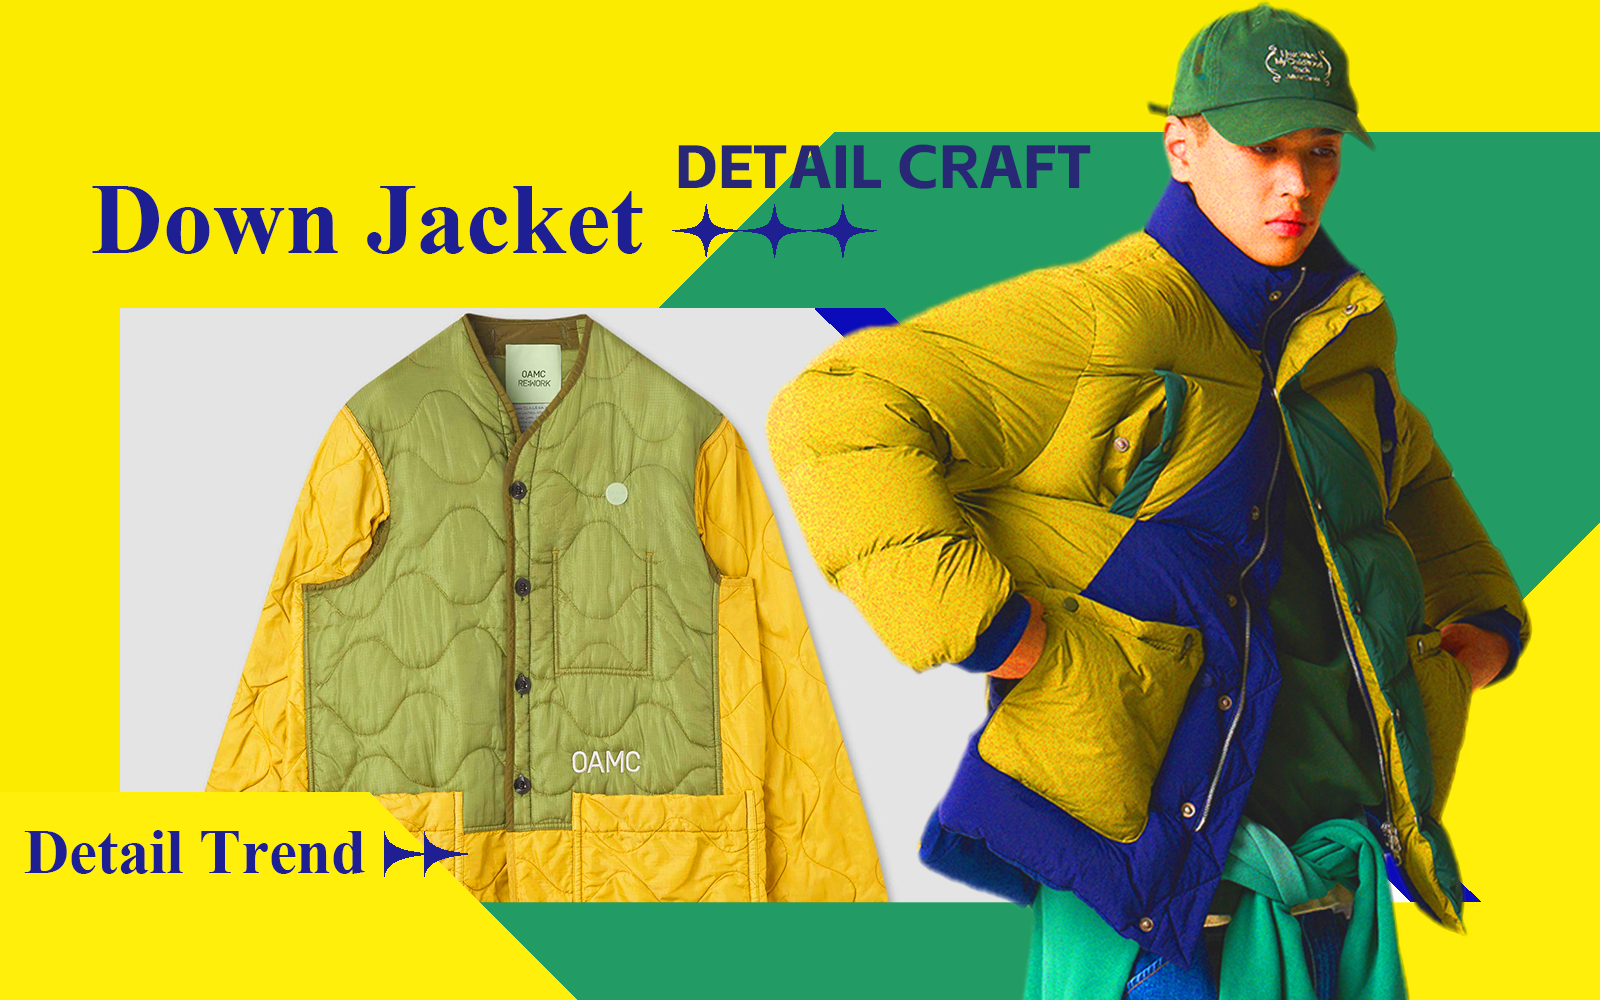 Creative Closure -- The Detail & Craft Trend for Men's Down Jacket